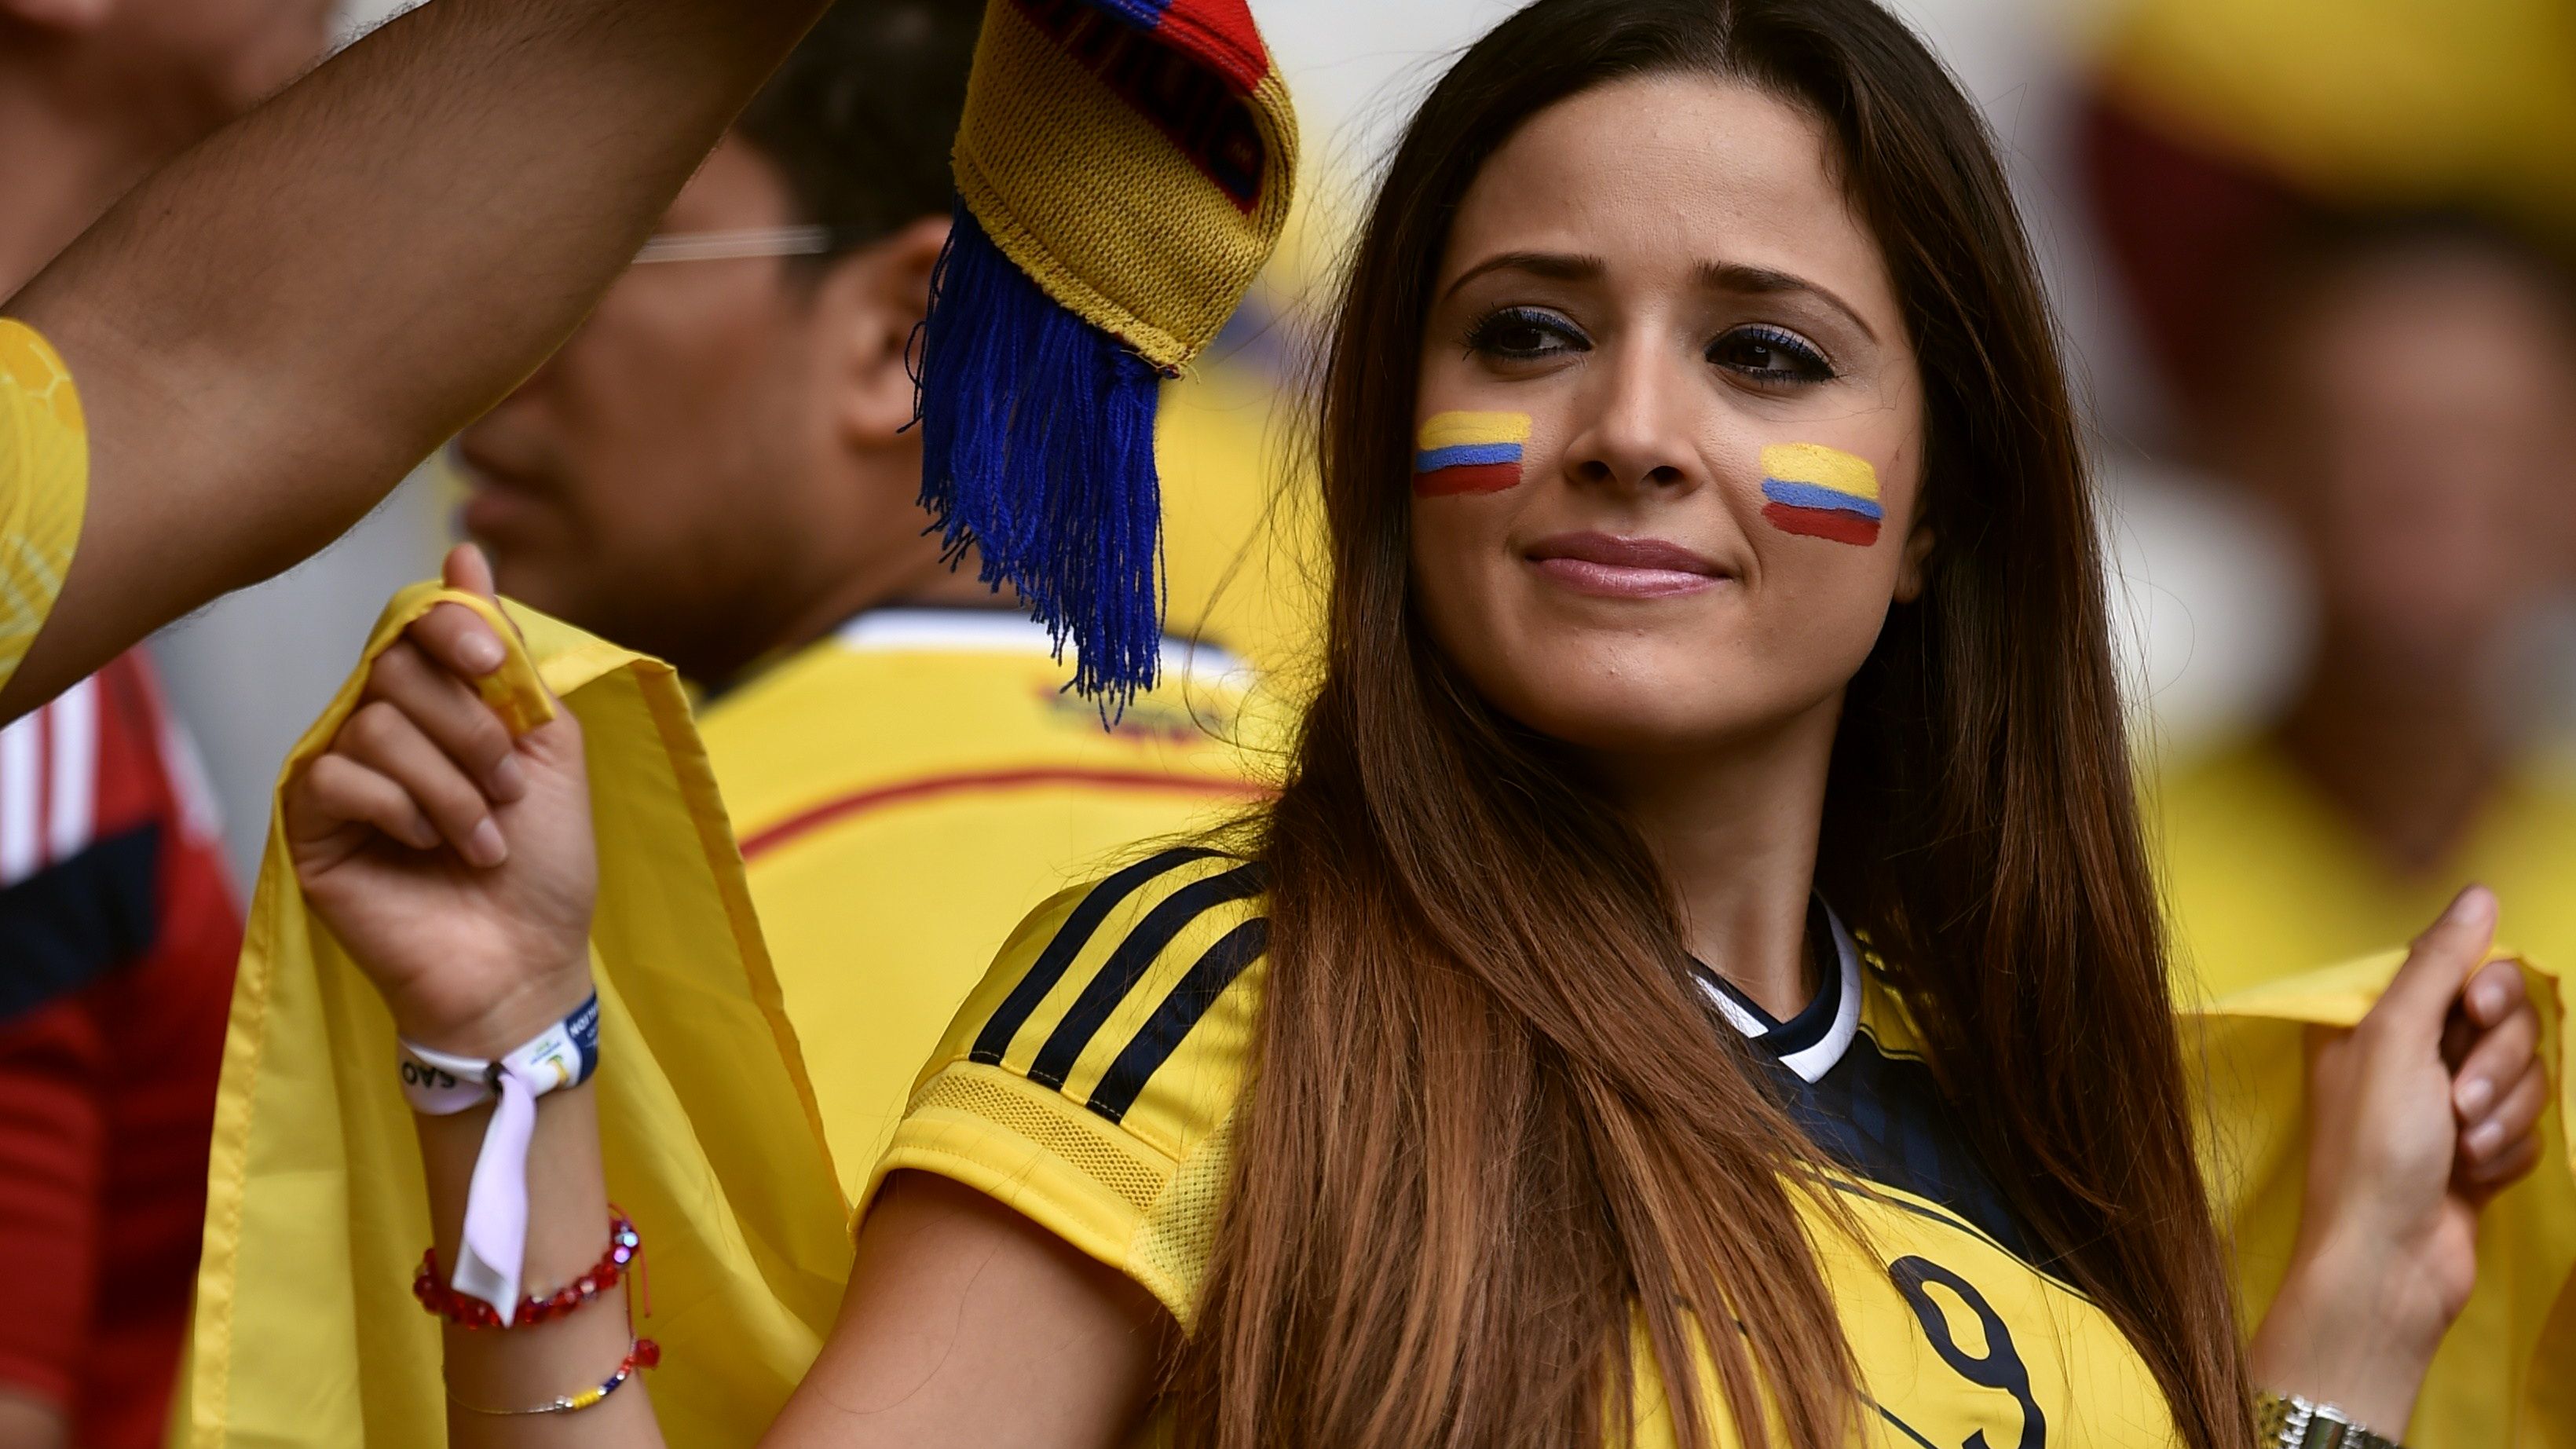 Wallpaper, women, yellow, Latinas, Colombian, clothing, Carnival, FIFA World Cup, color, festival, fun, costume 3280x1845